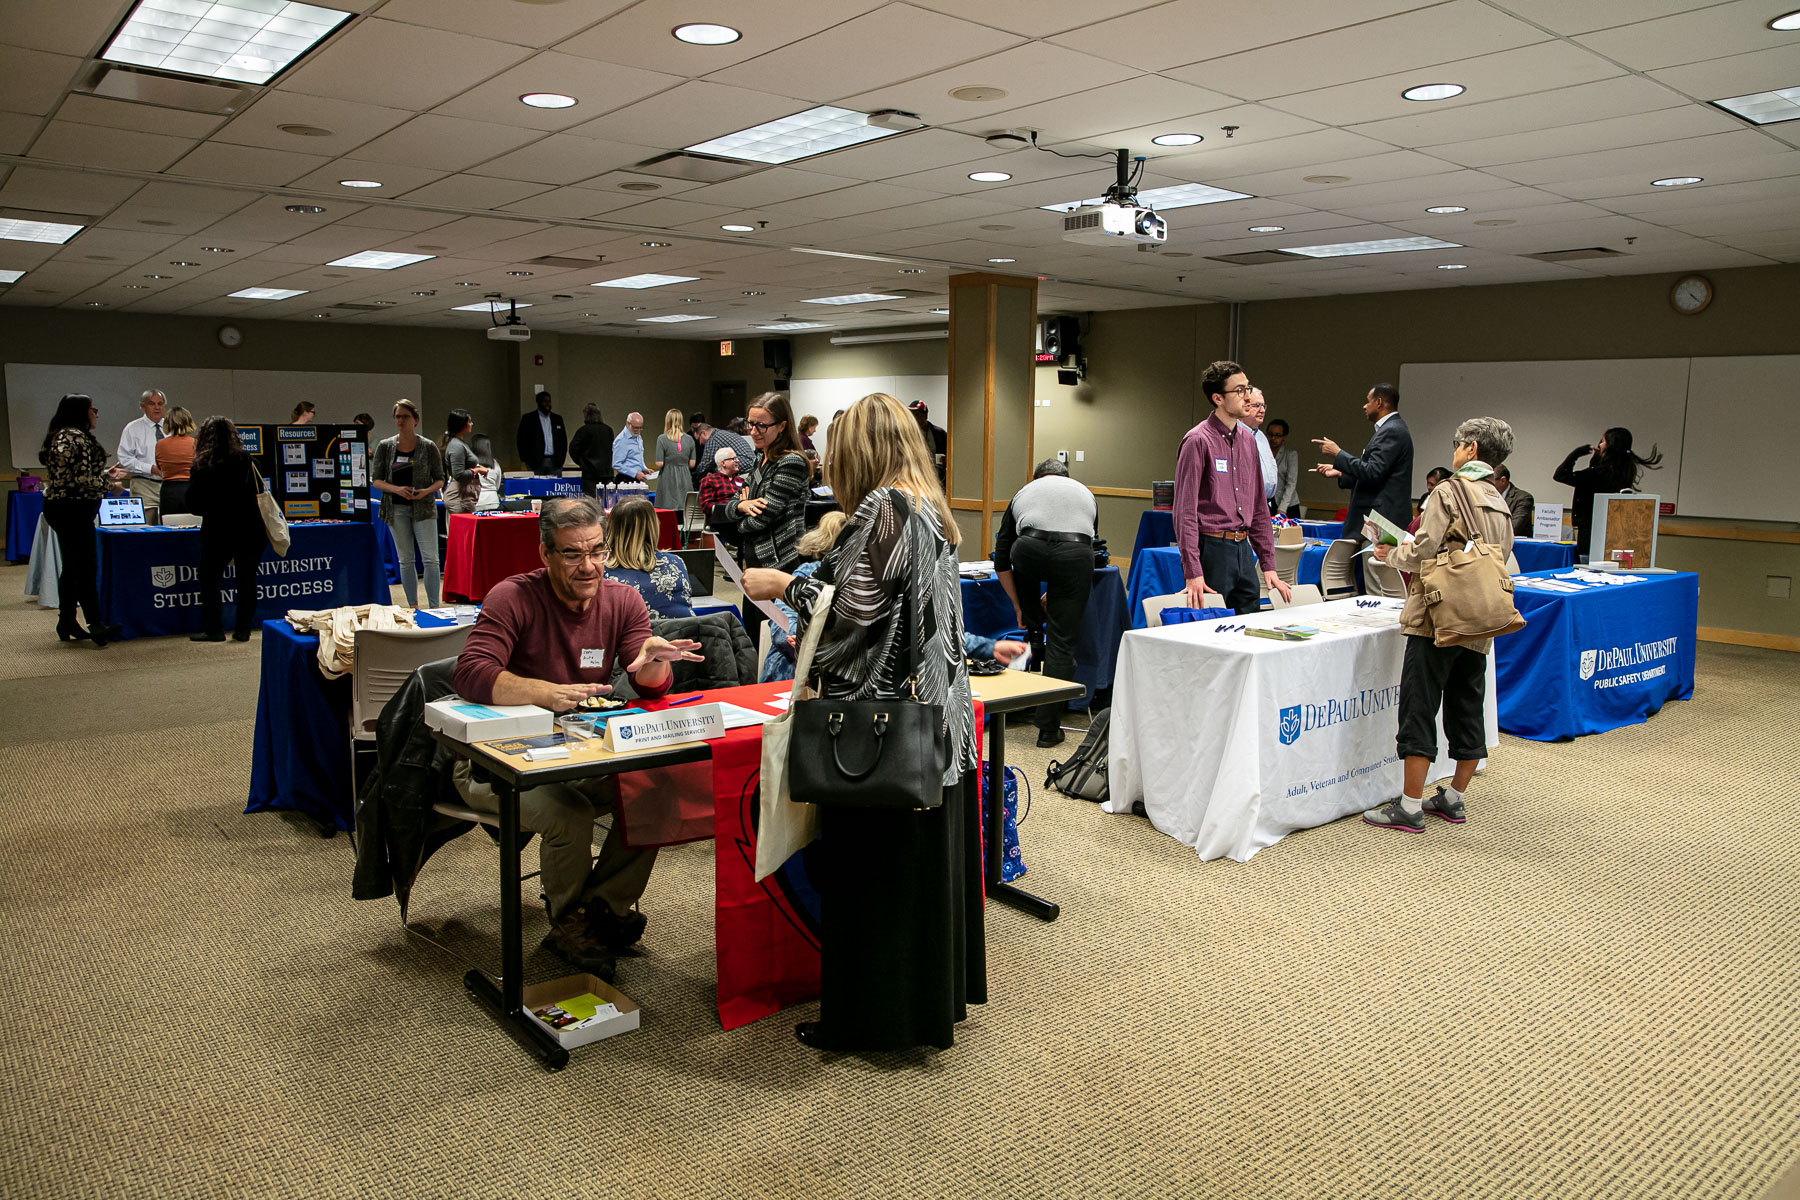 More than 20 departments set up educational booths in the Student Center, and attendees were able to engage with department representatives about campus resources for adjunct faculty. (DePaul University/Randall Spriggs)